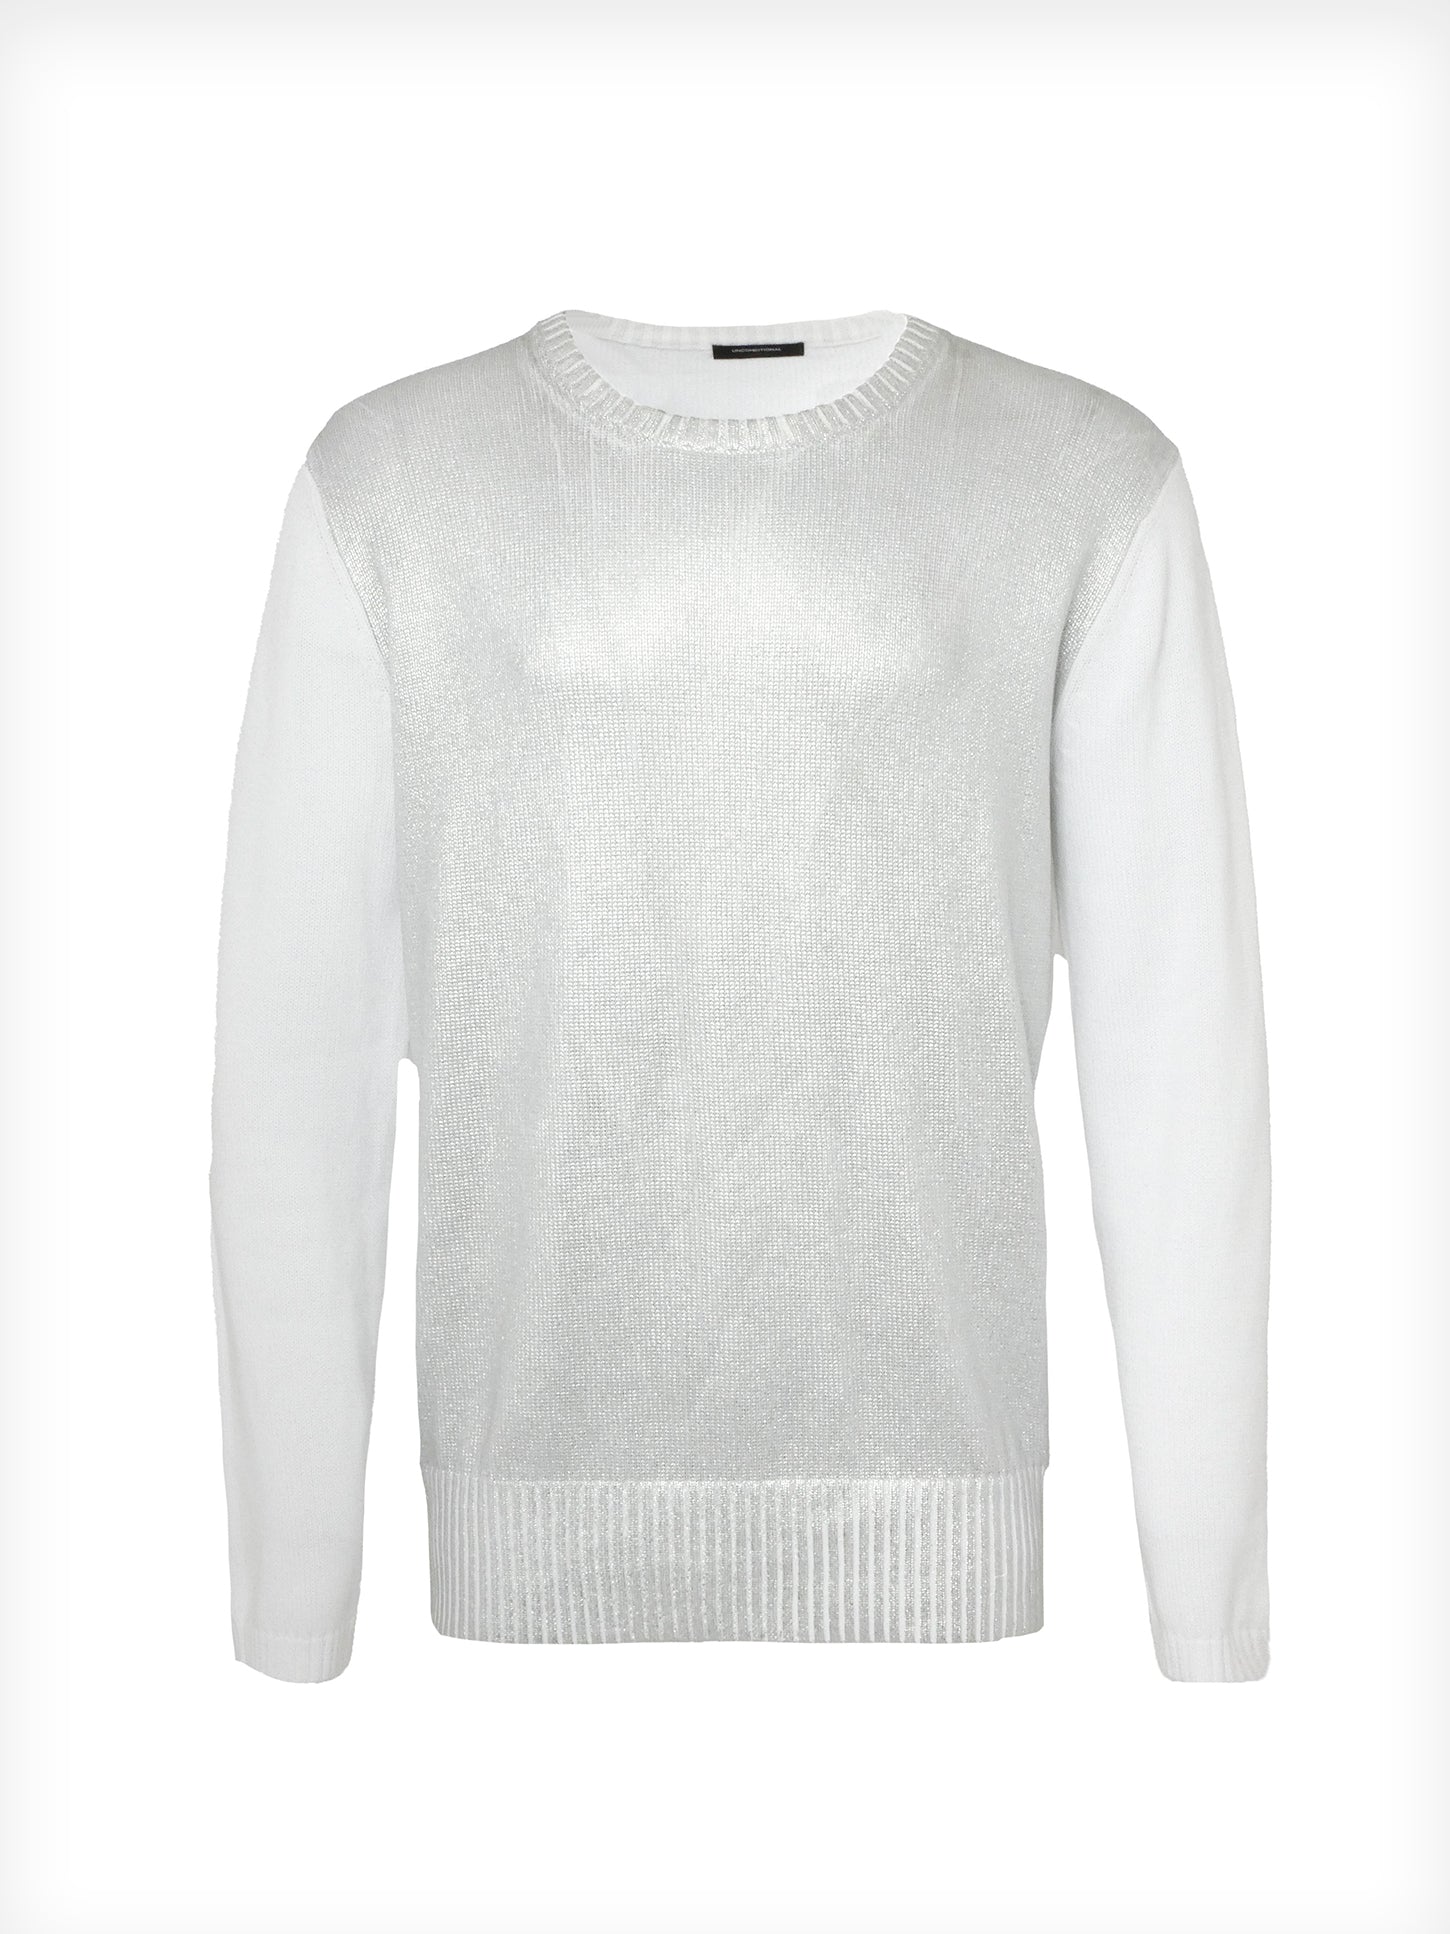 White Jumper With Silver Glitter Detail